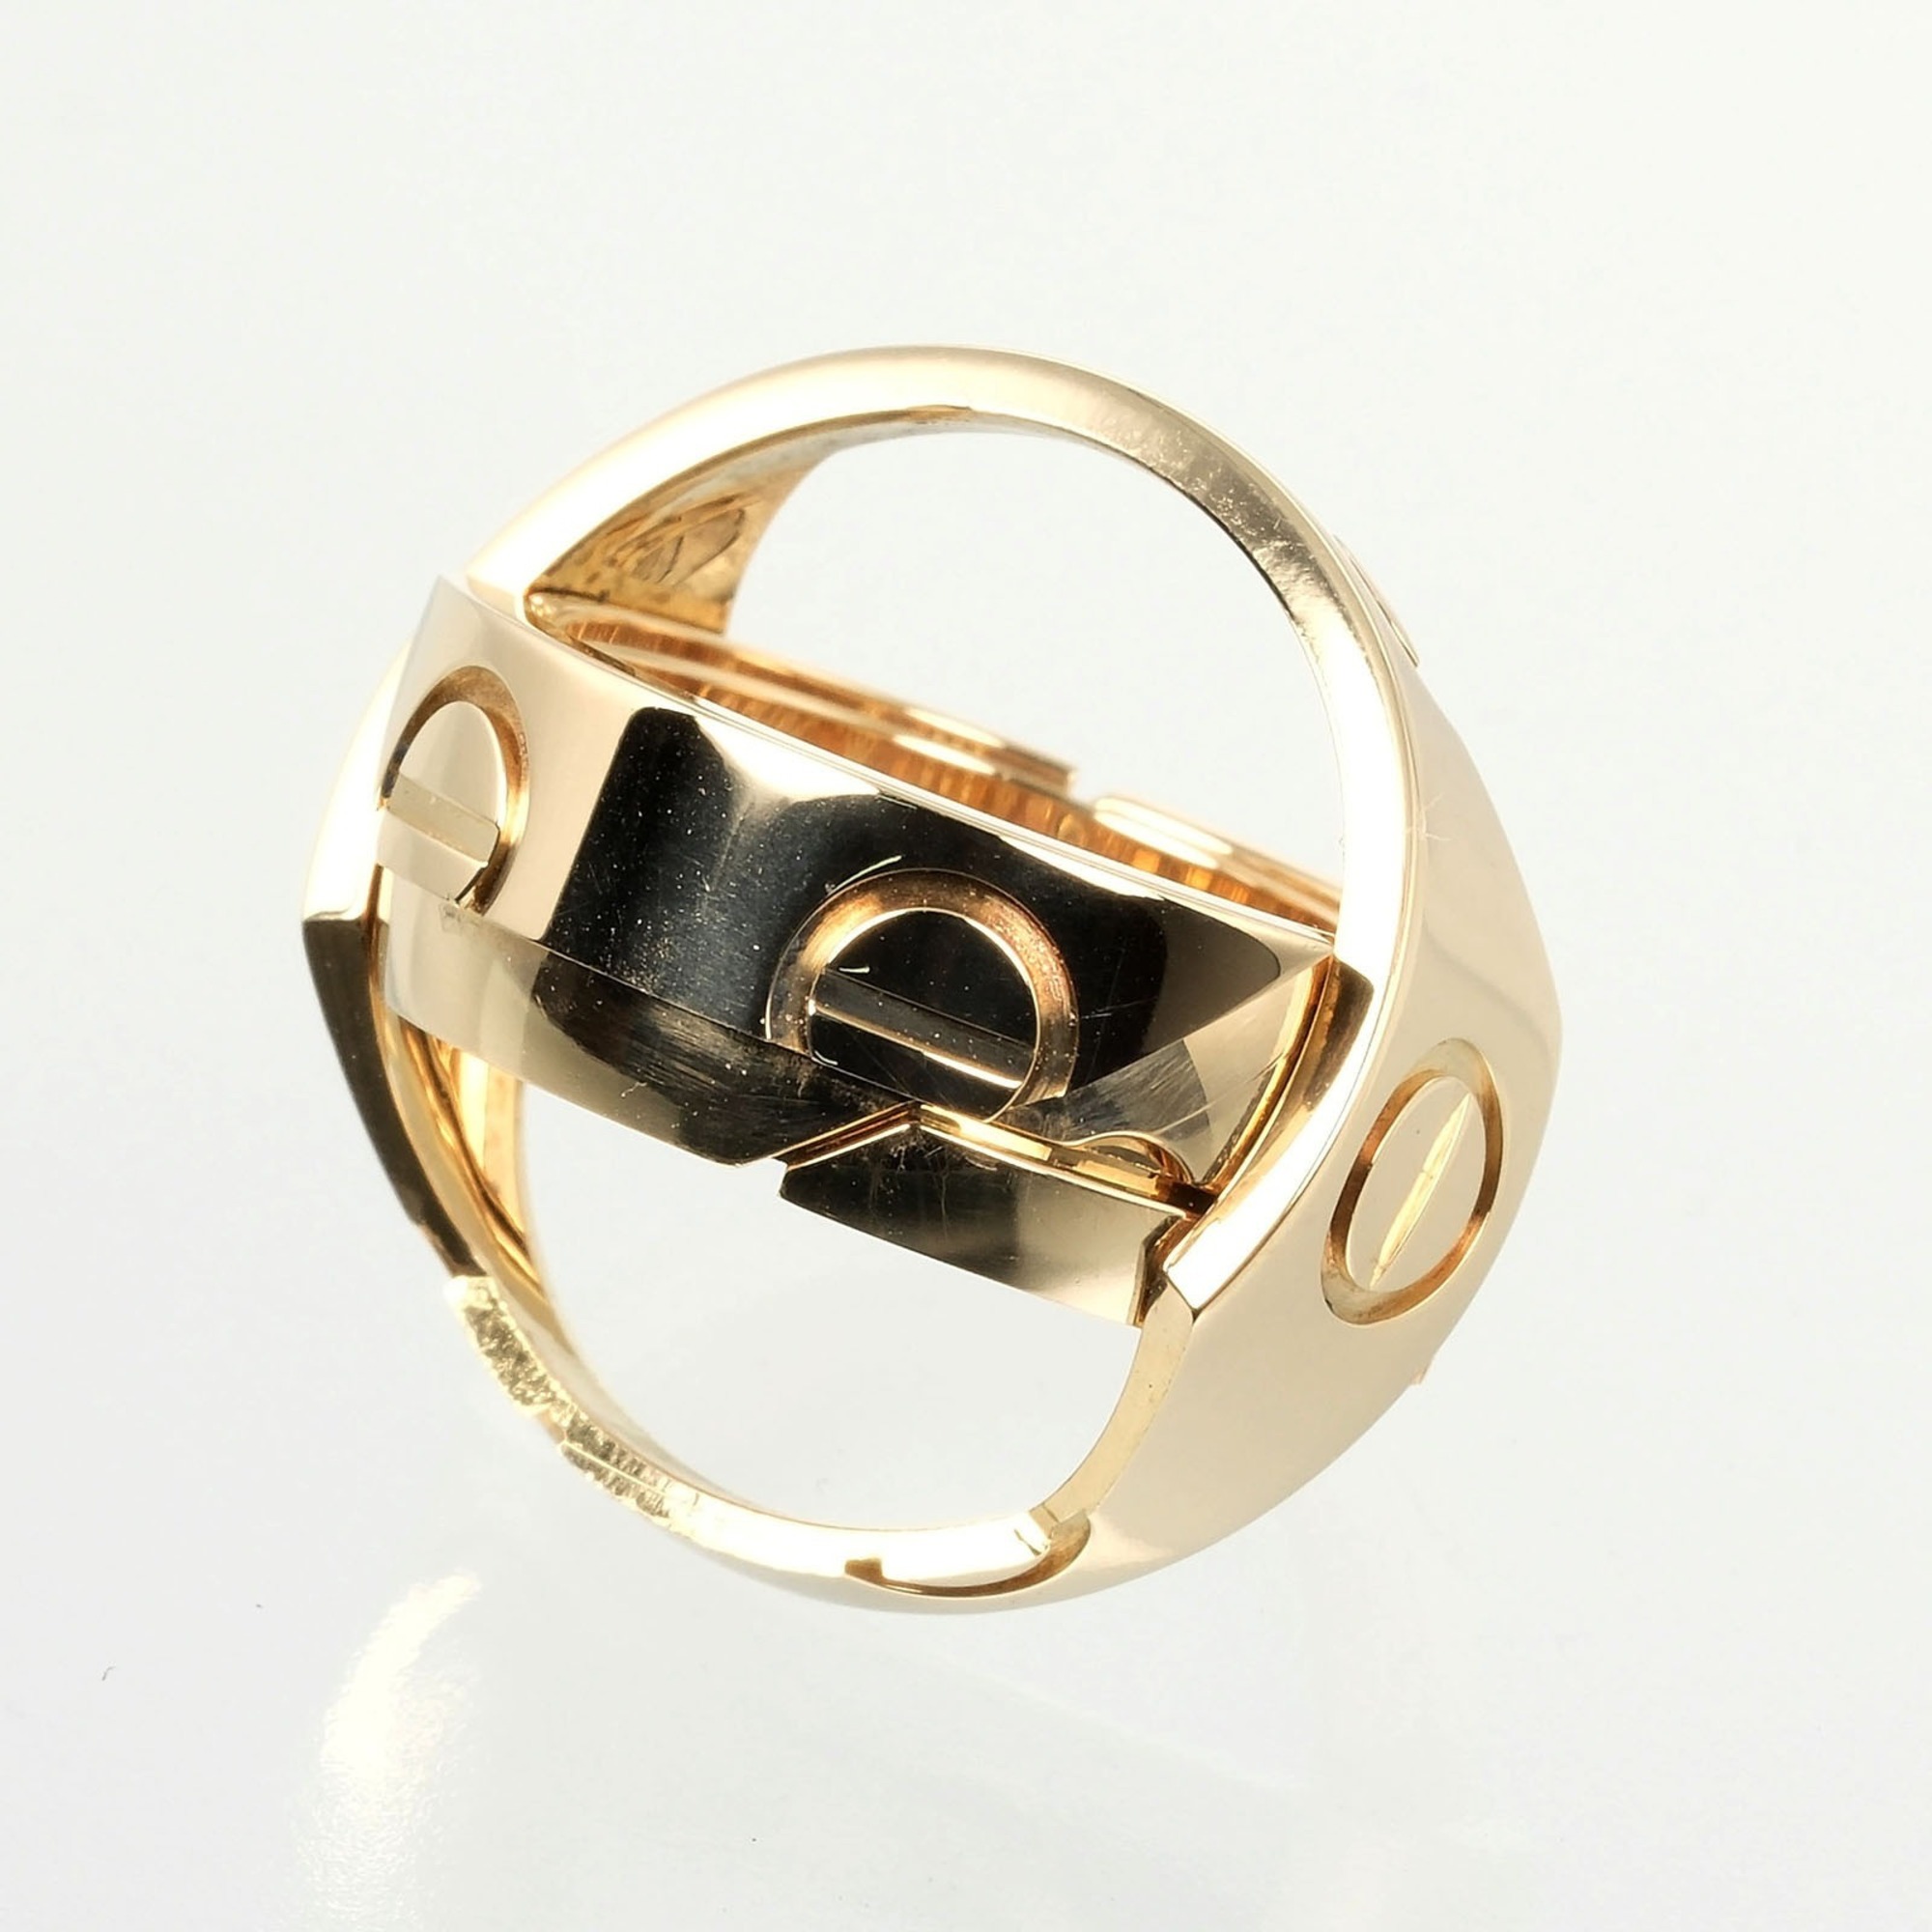 Cartier Astro Love size 9 ring, K18 YG yellow gold, approx. 11.68g I132124018